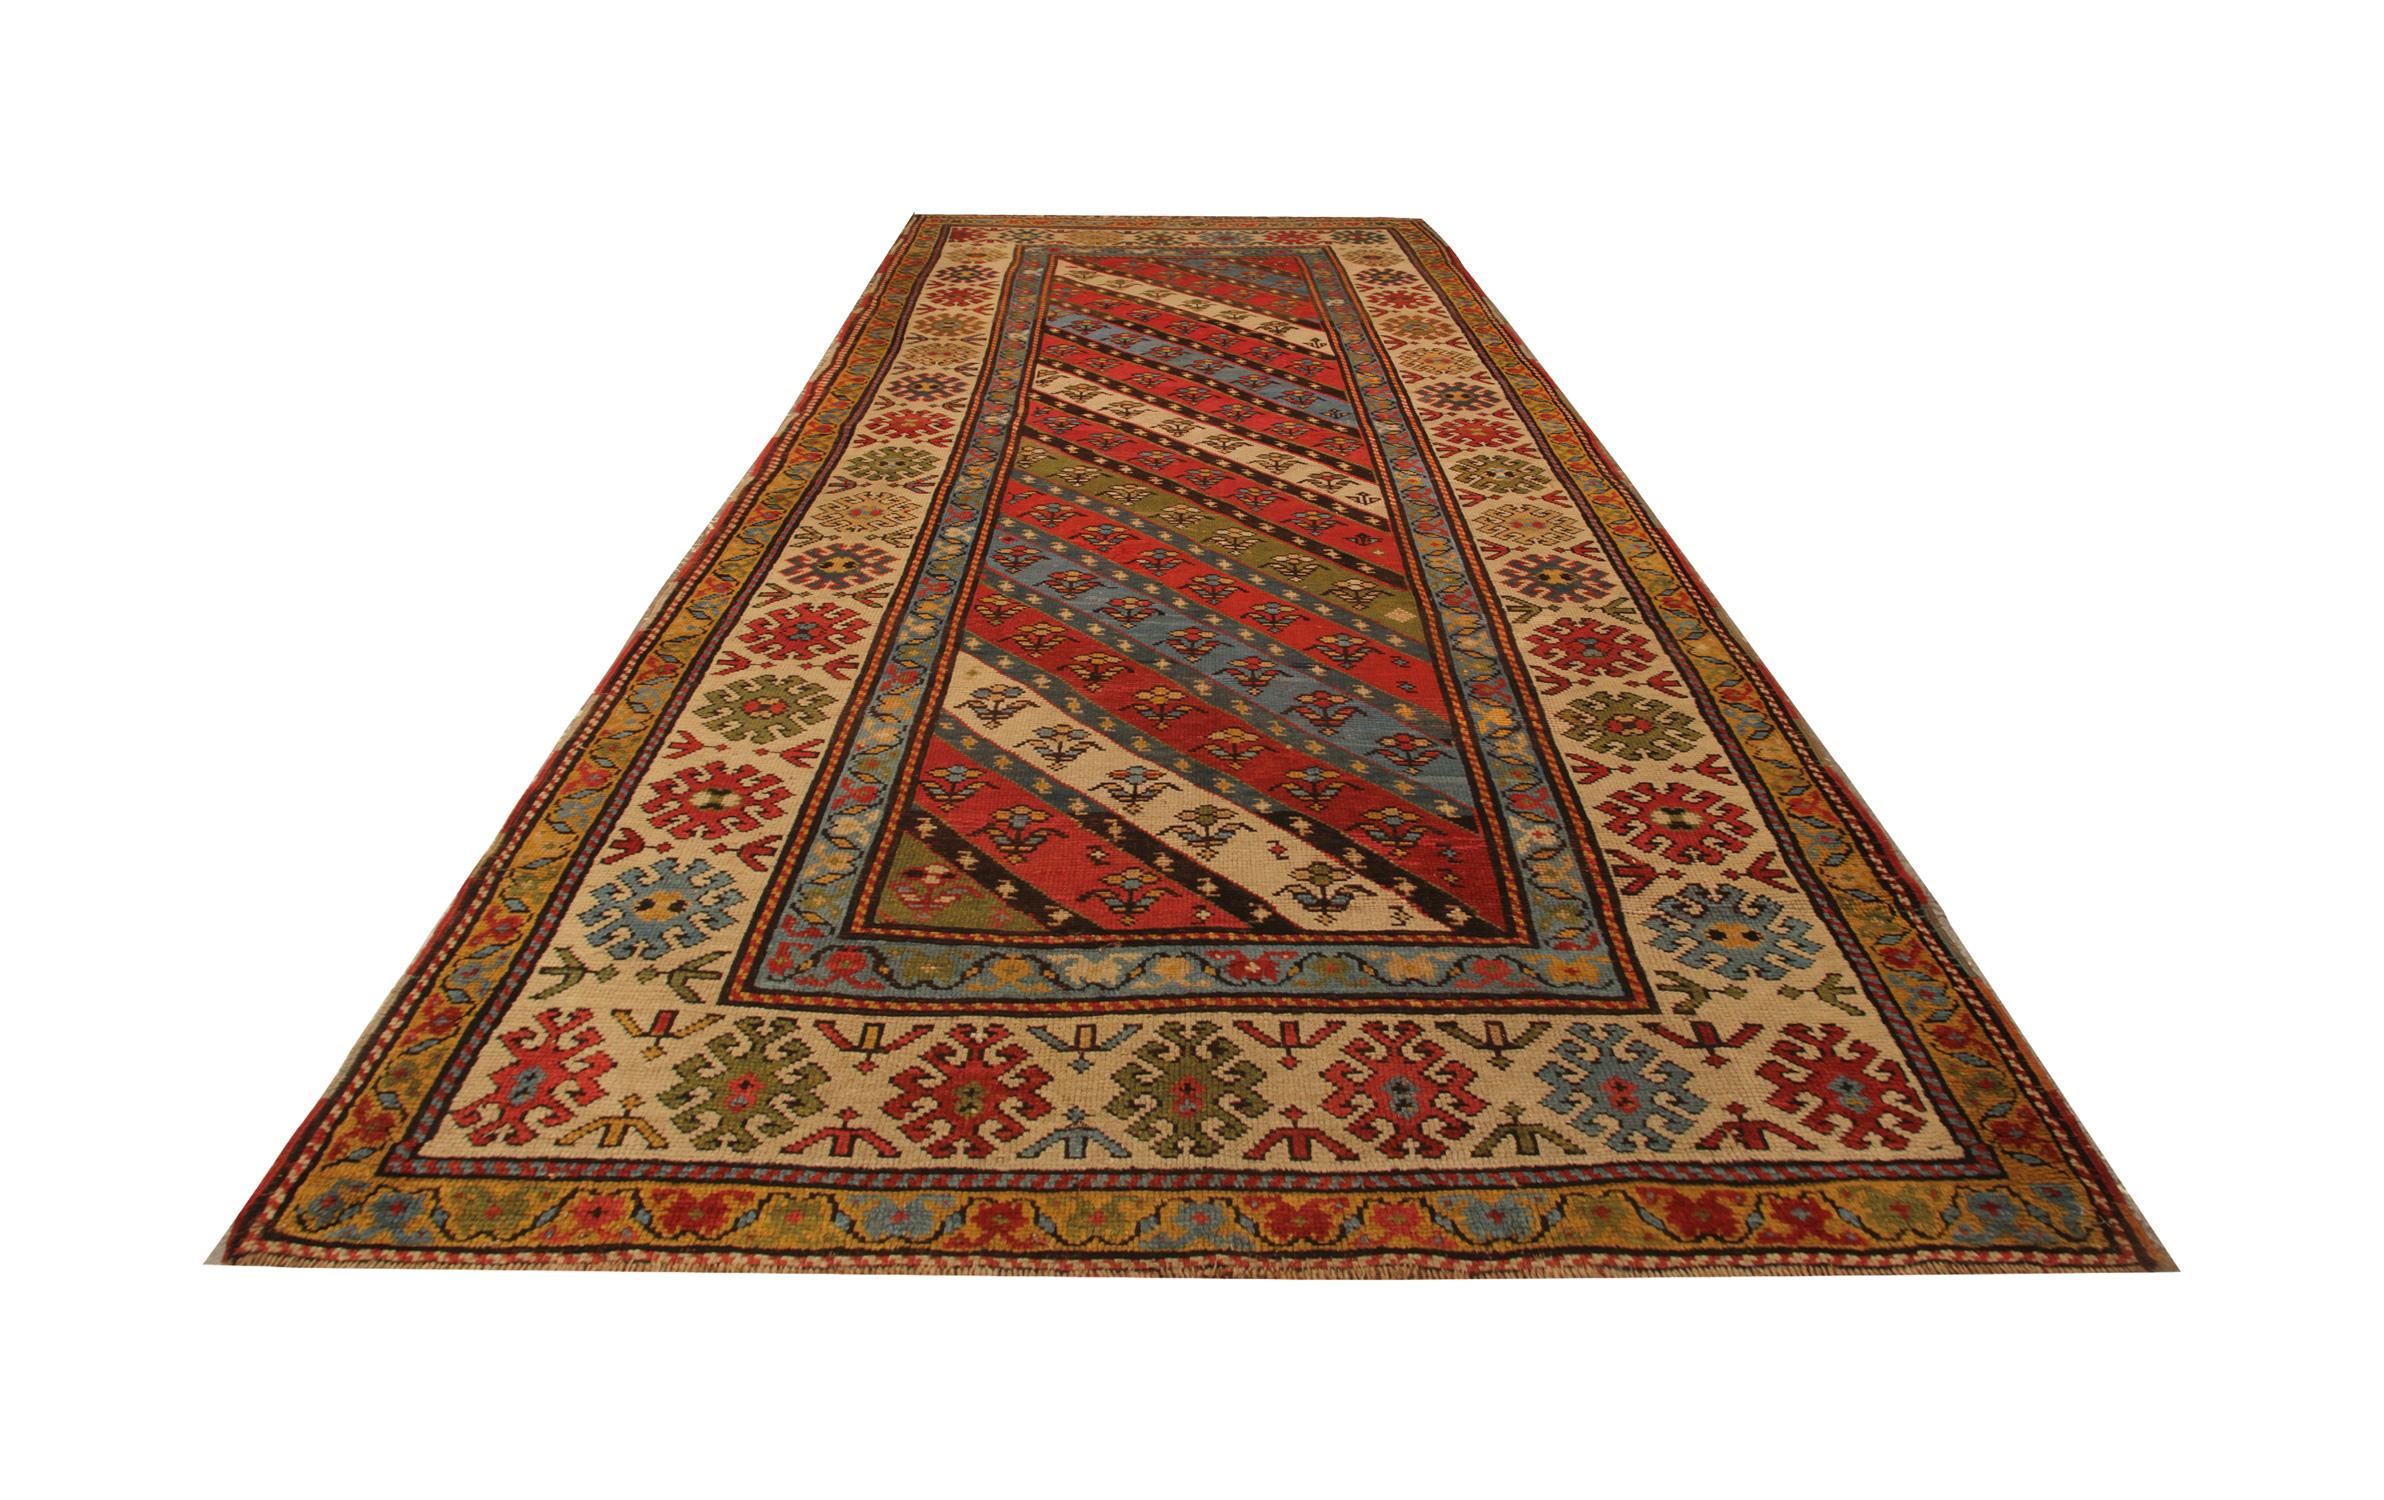 Step into history with our rare antique rug, a captivating piece of craftsmanship from the Caucasian region. Hand-knotted with meticulous care in the 1880s, this oriental masterpiece boasts an excellent condition, preserving its antique allure.